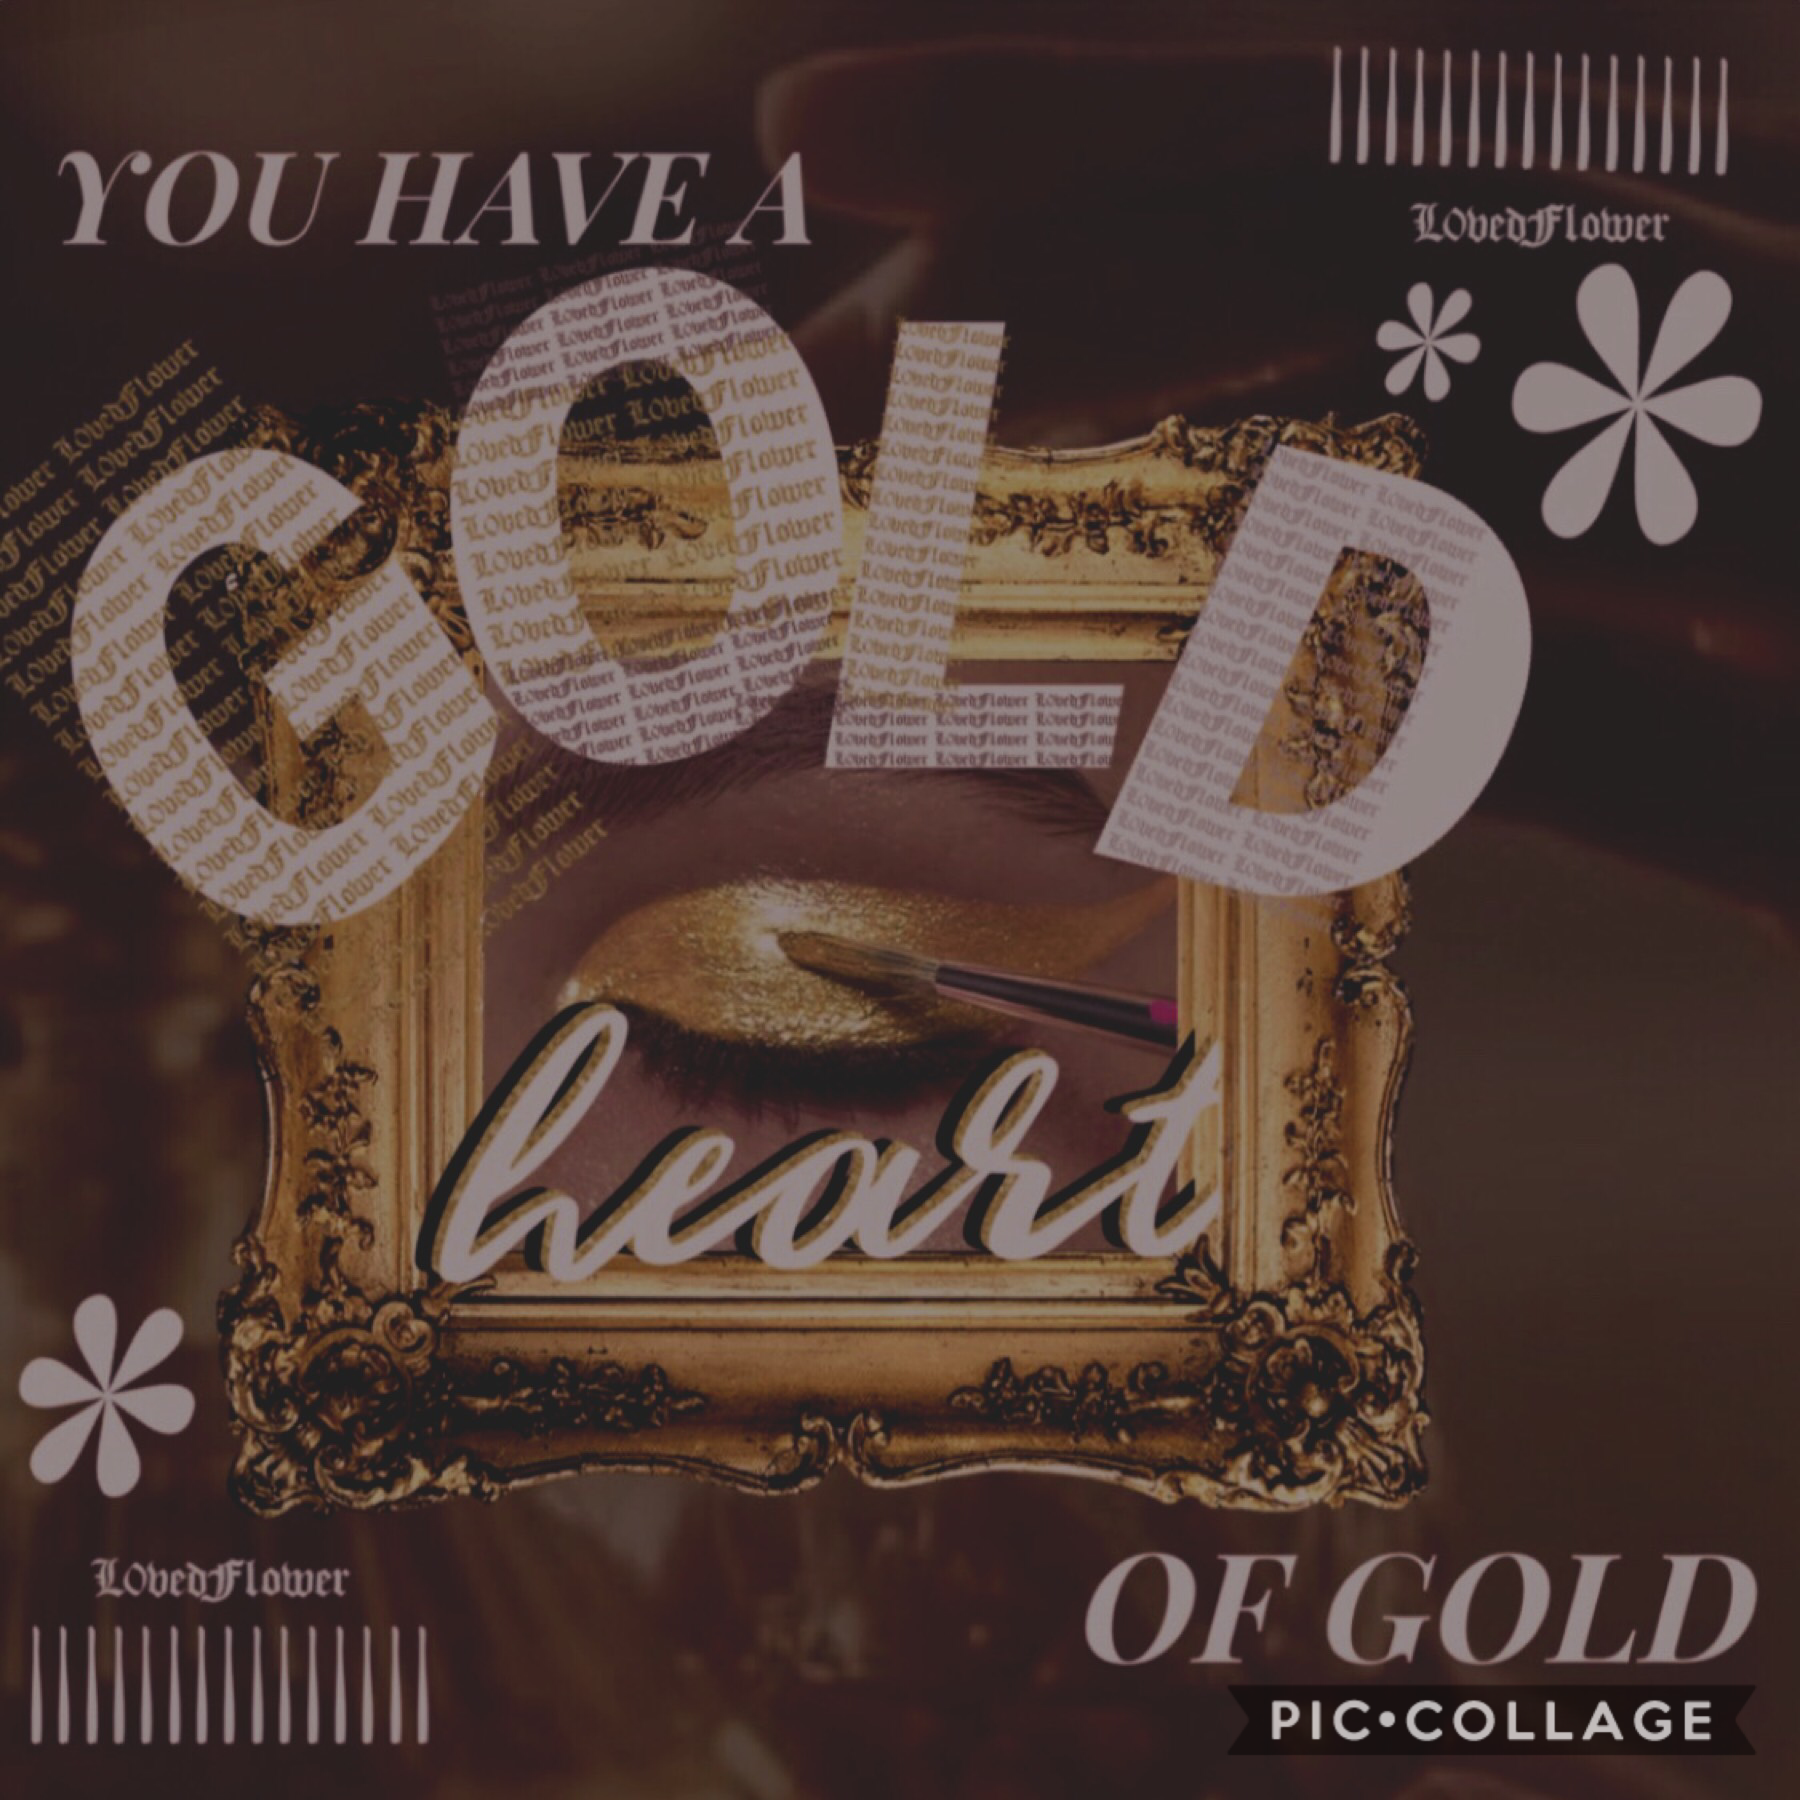 [ click ]
“You have a heart of gold”
“GOLD” 
thank you for the loveee and support everyoneeeeee 
I love you all💗
